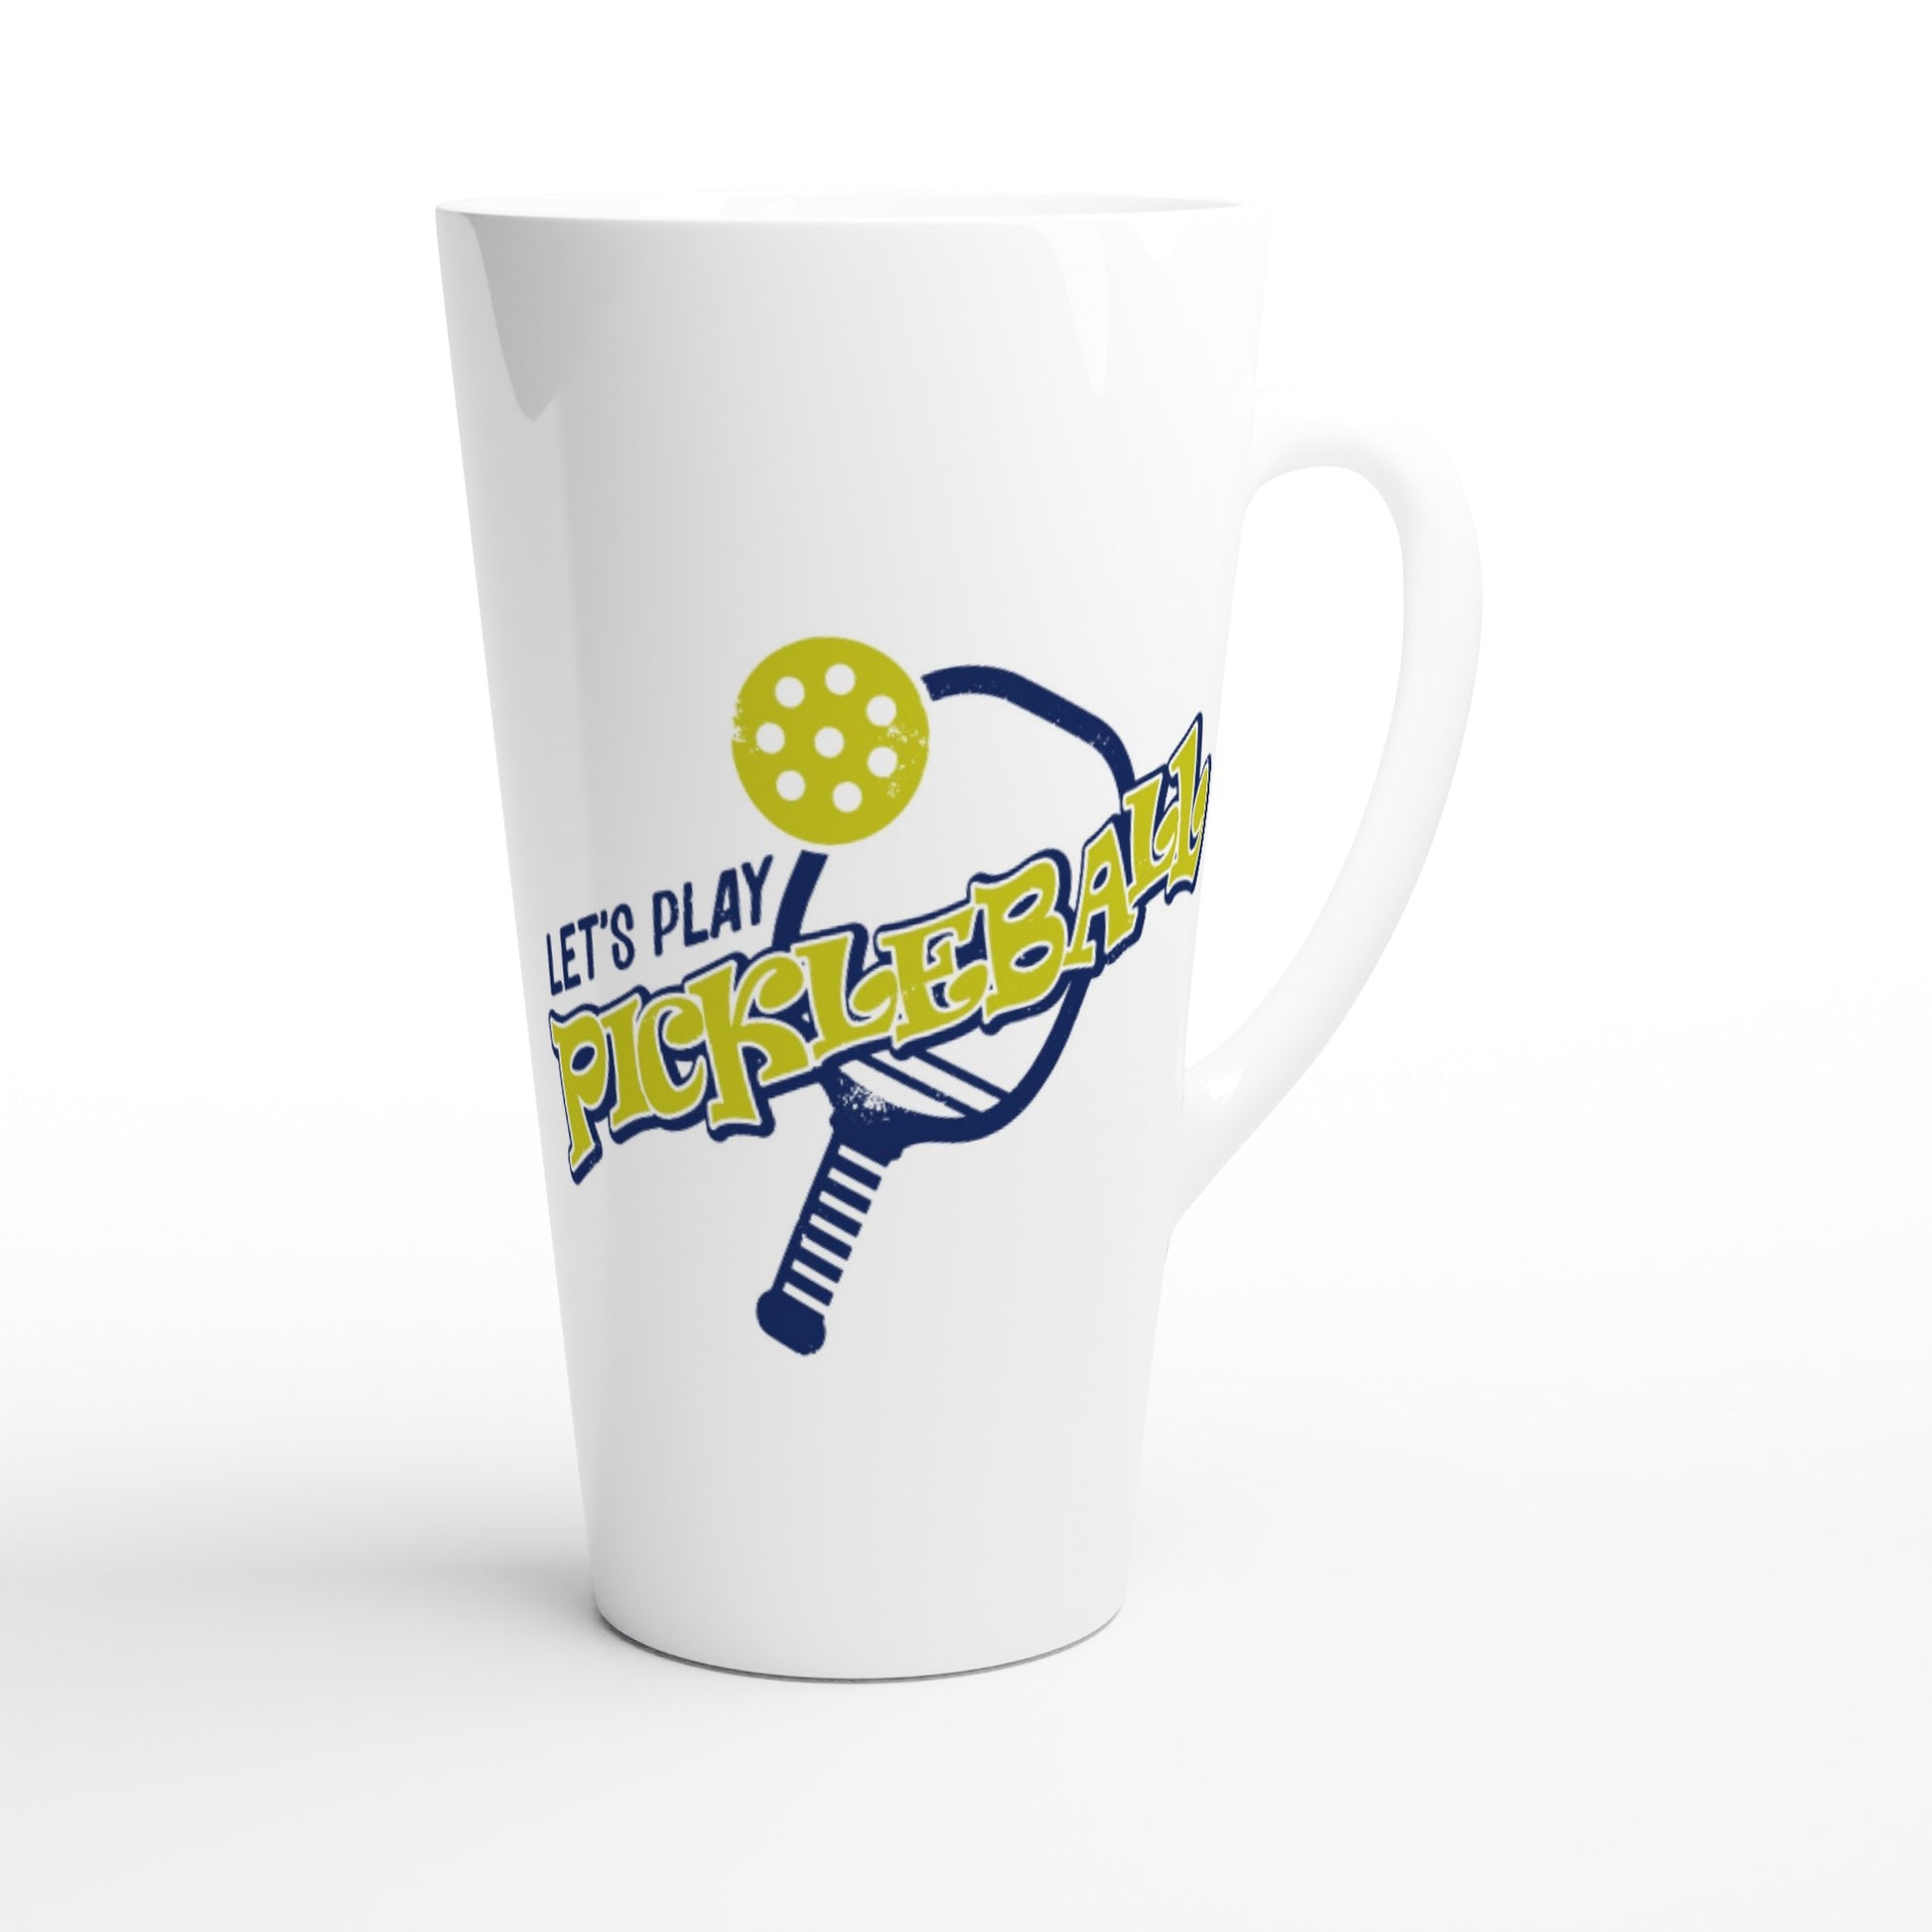 Personalized Seventeener white ceramic 17oz mug with original personalized motto [Your Name] Would be a PickleBall SuperStar if it wasn’t for that Darn net and those lines! on front and Let’s Play Pickleball logo on back coffee mug dishwasher and microwave safe from WhatYa Say Apparel back view.